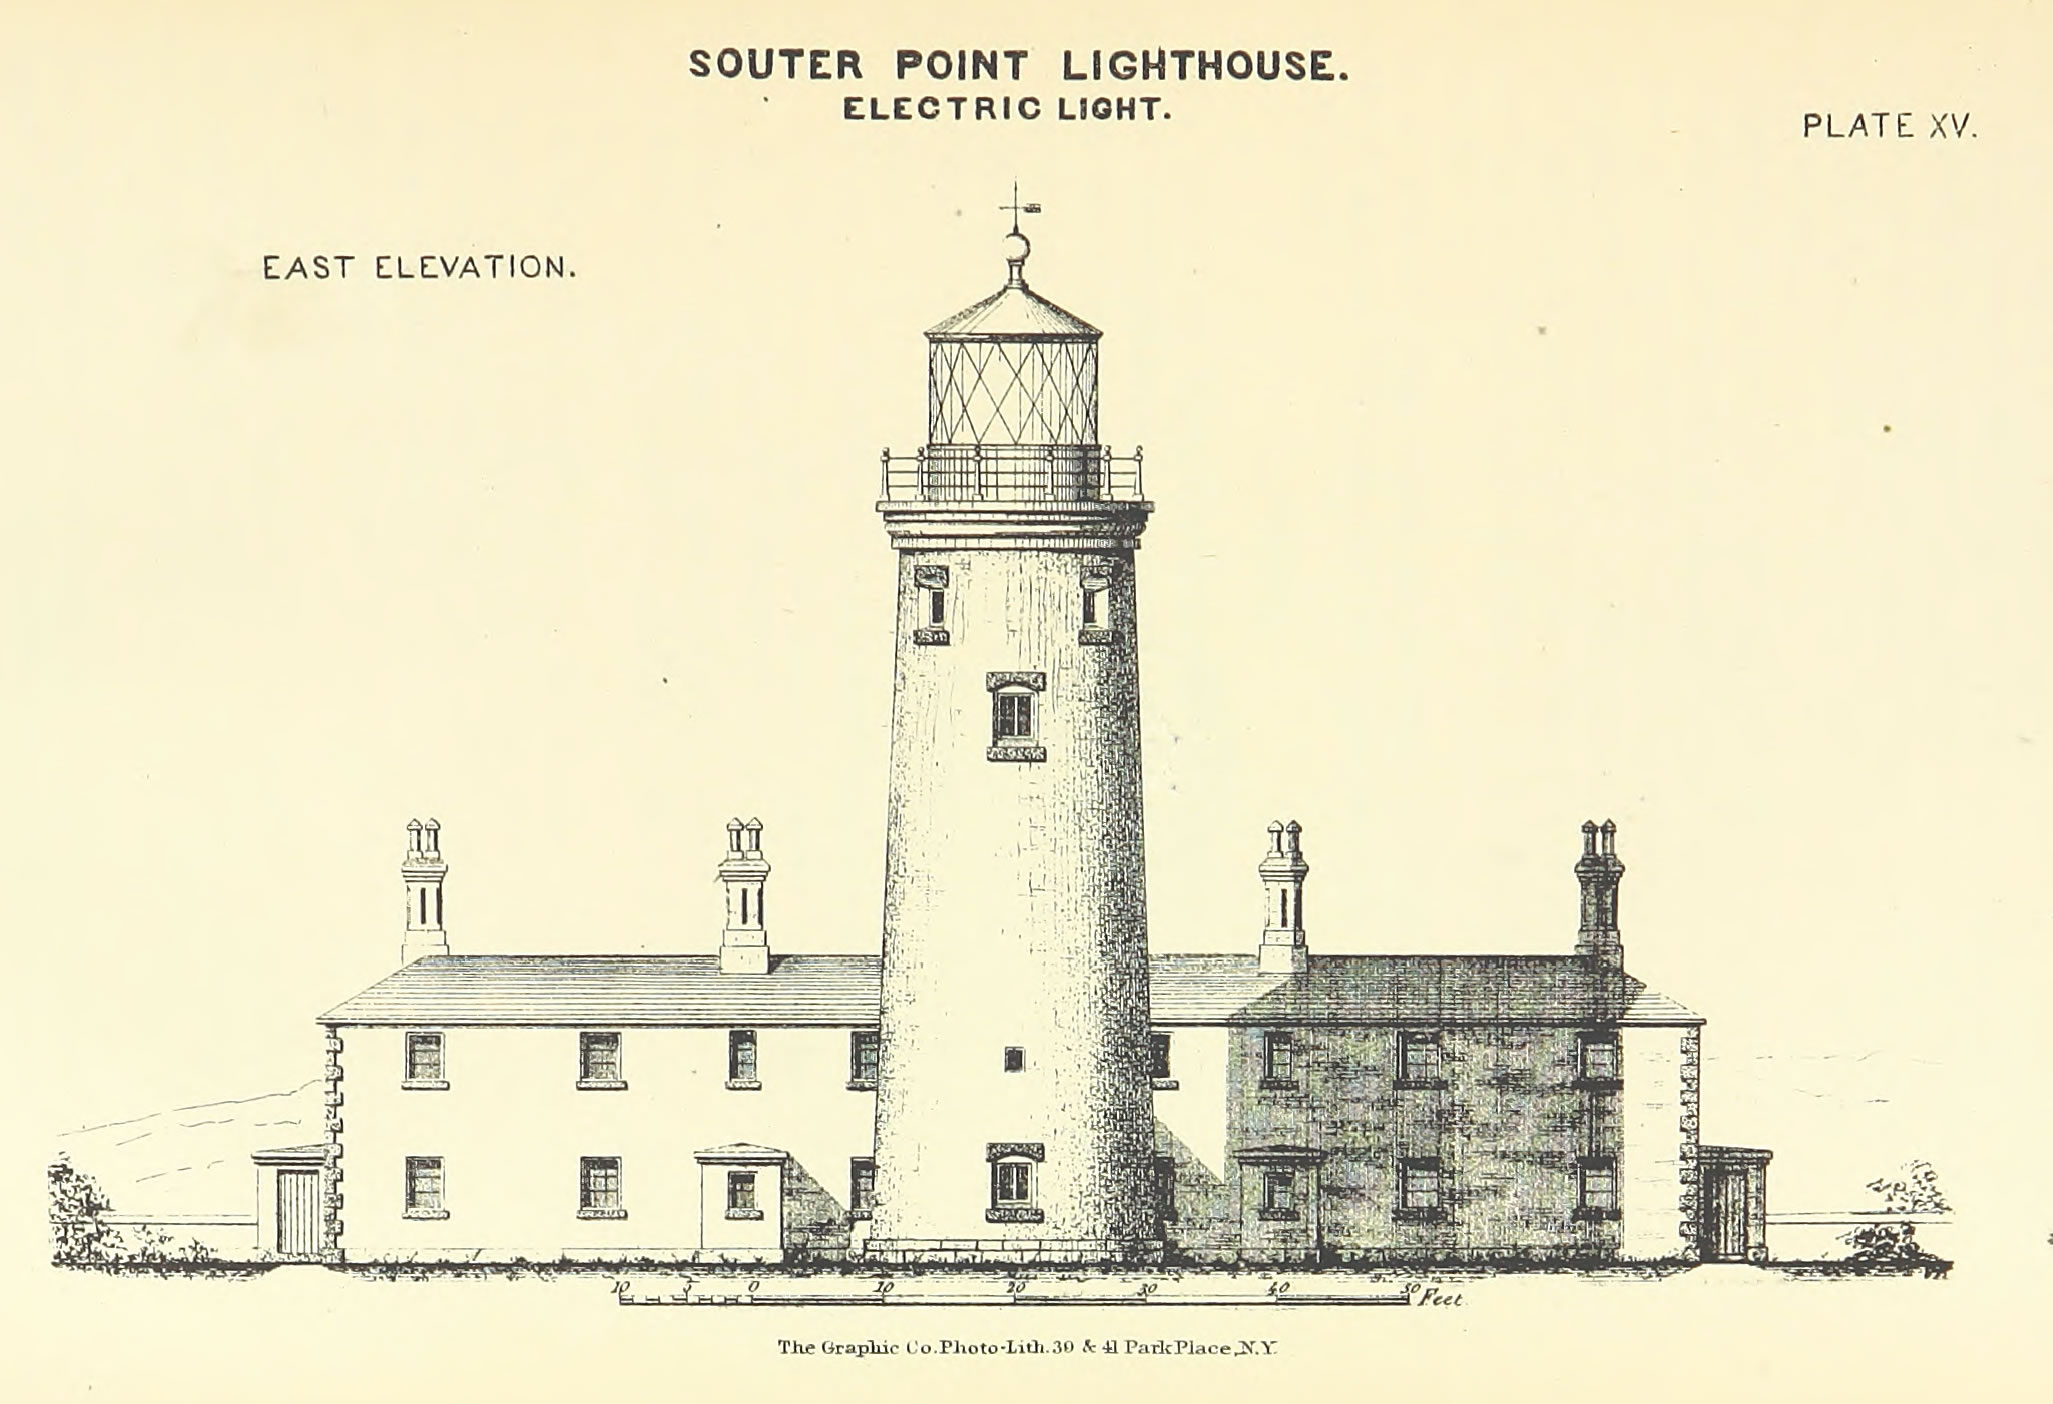 Souter Point Lighthouse